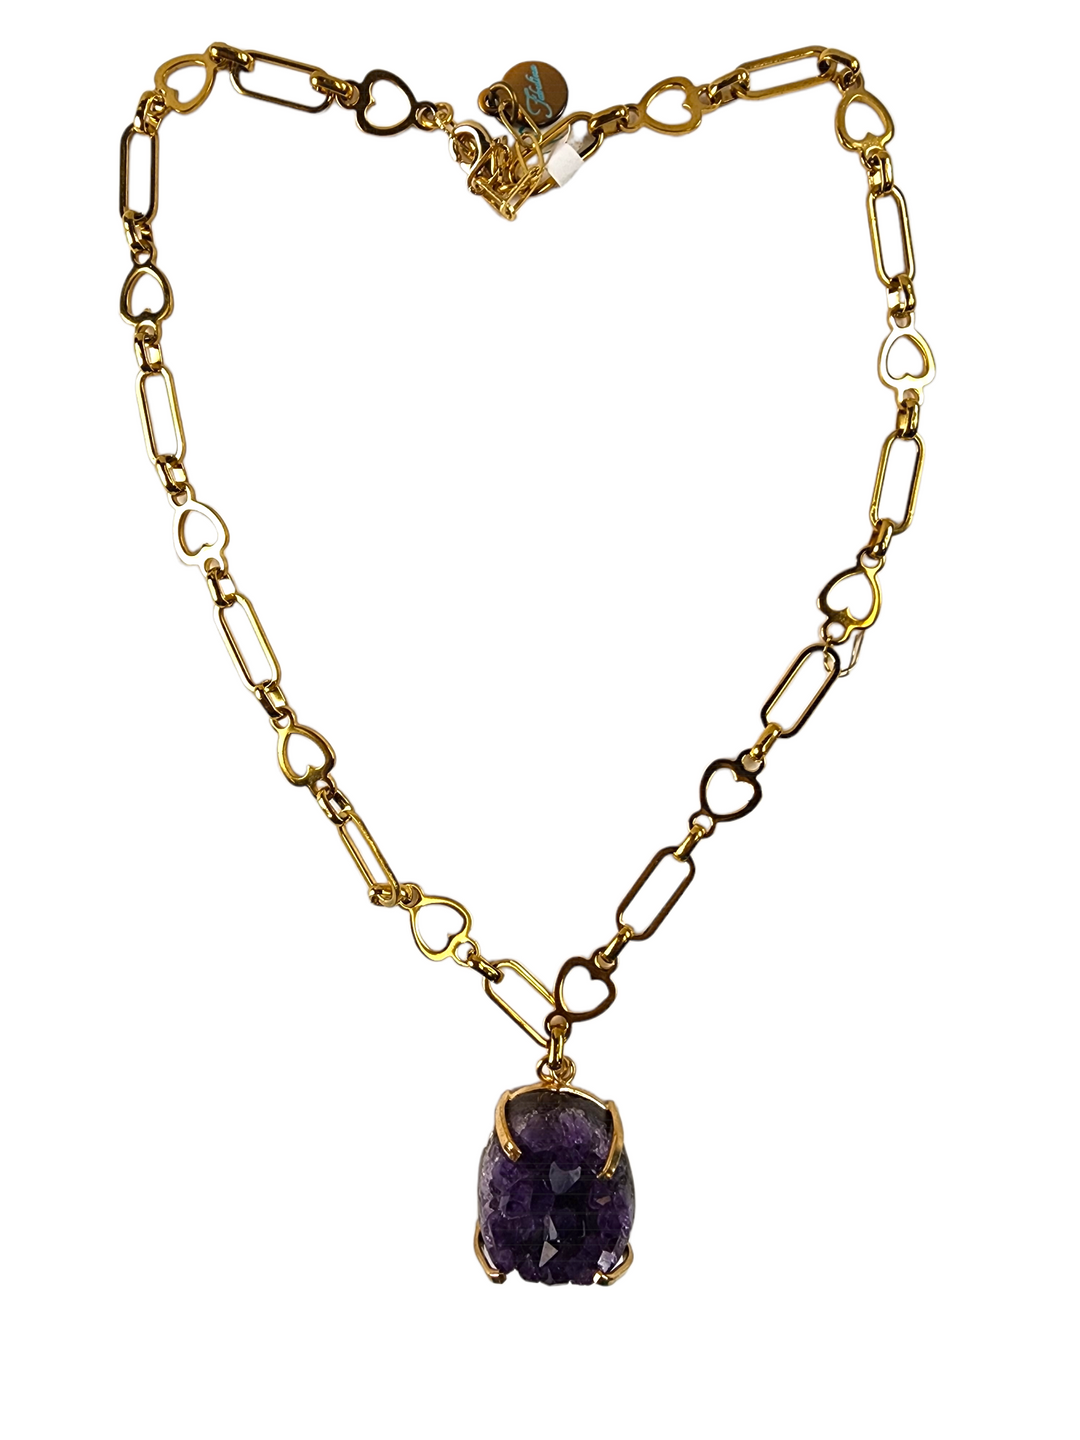 The Zola Amethyst Necklace Collection